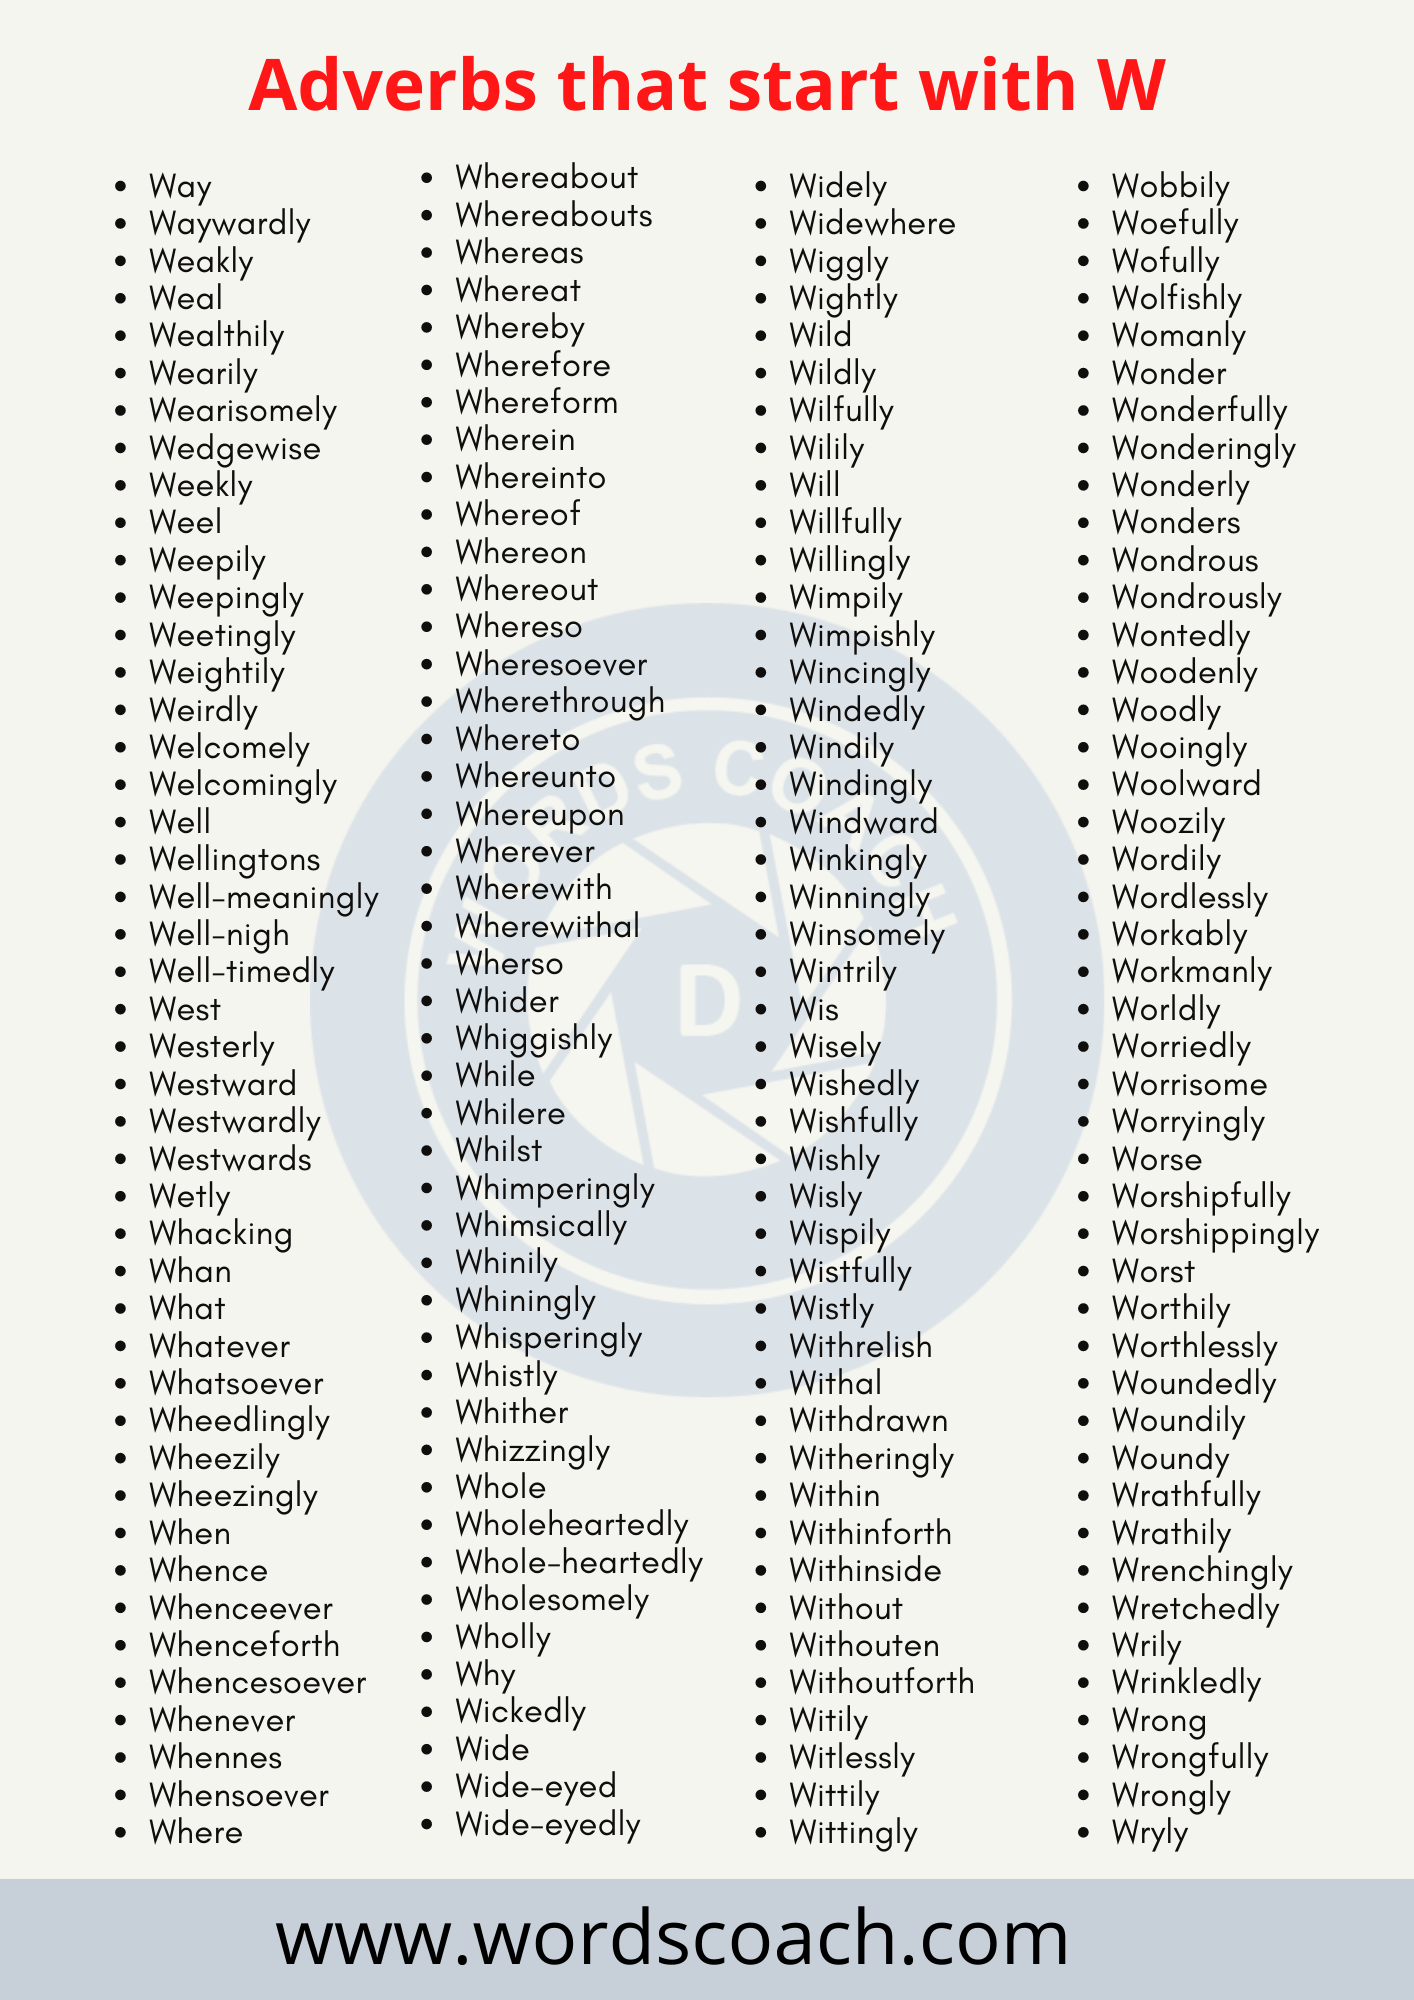 Adverbs that start with W - wordscoach.com